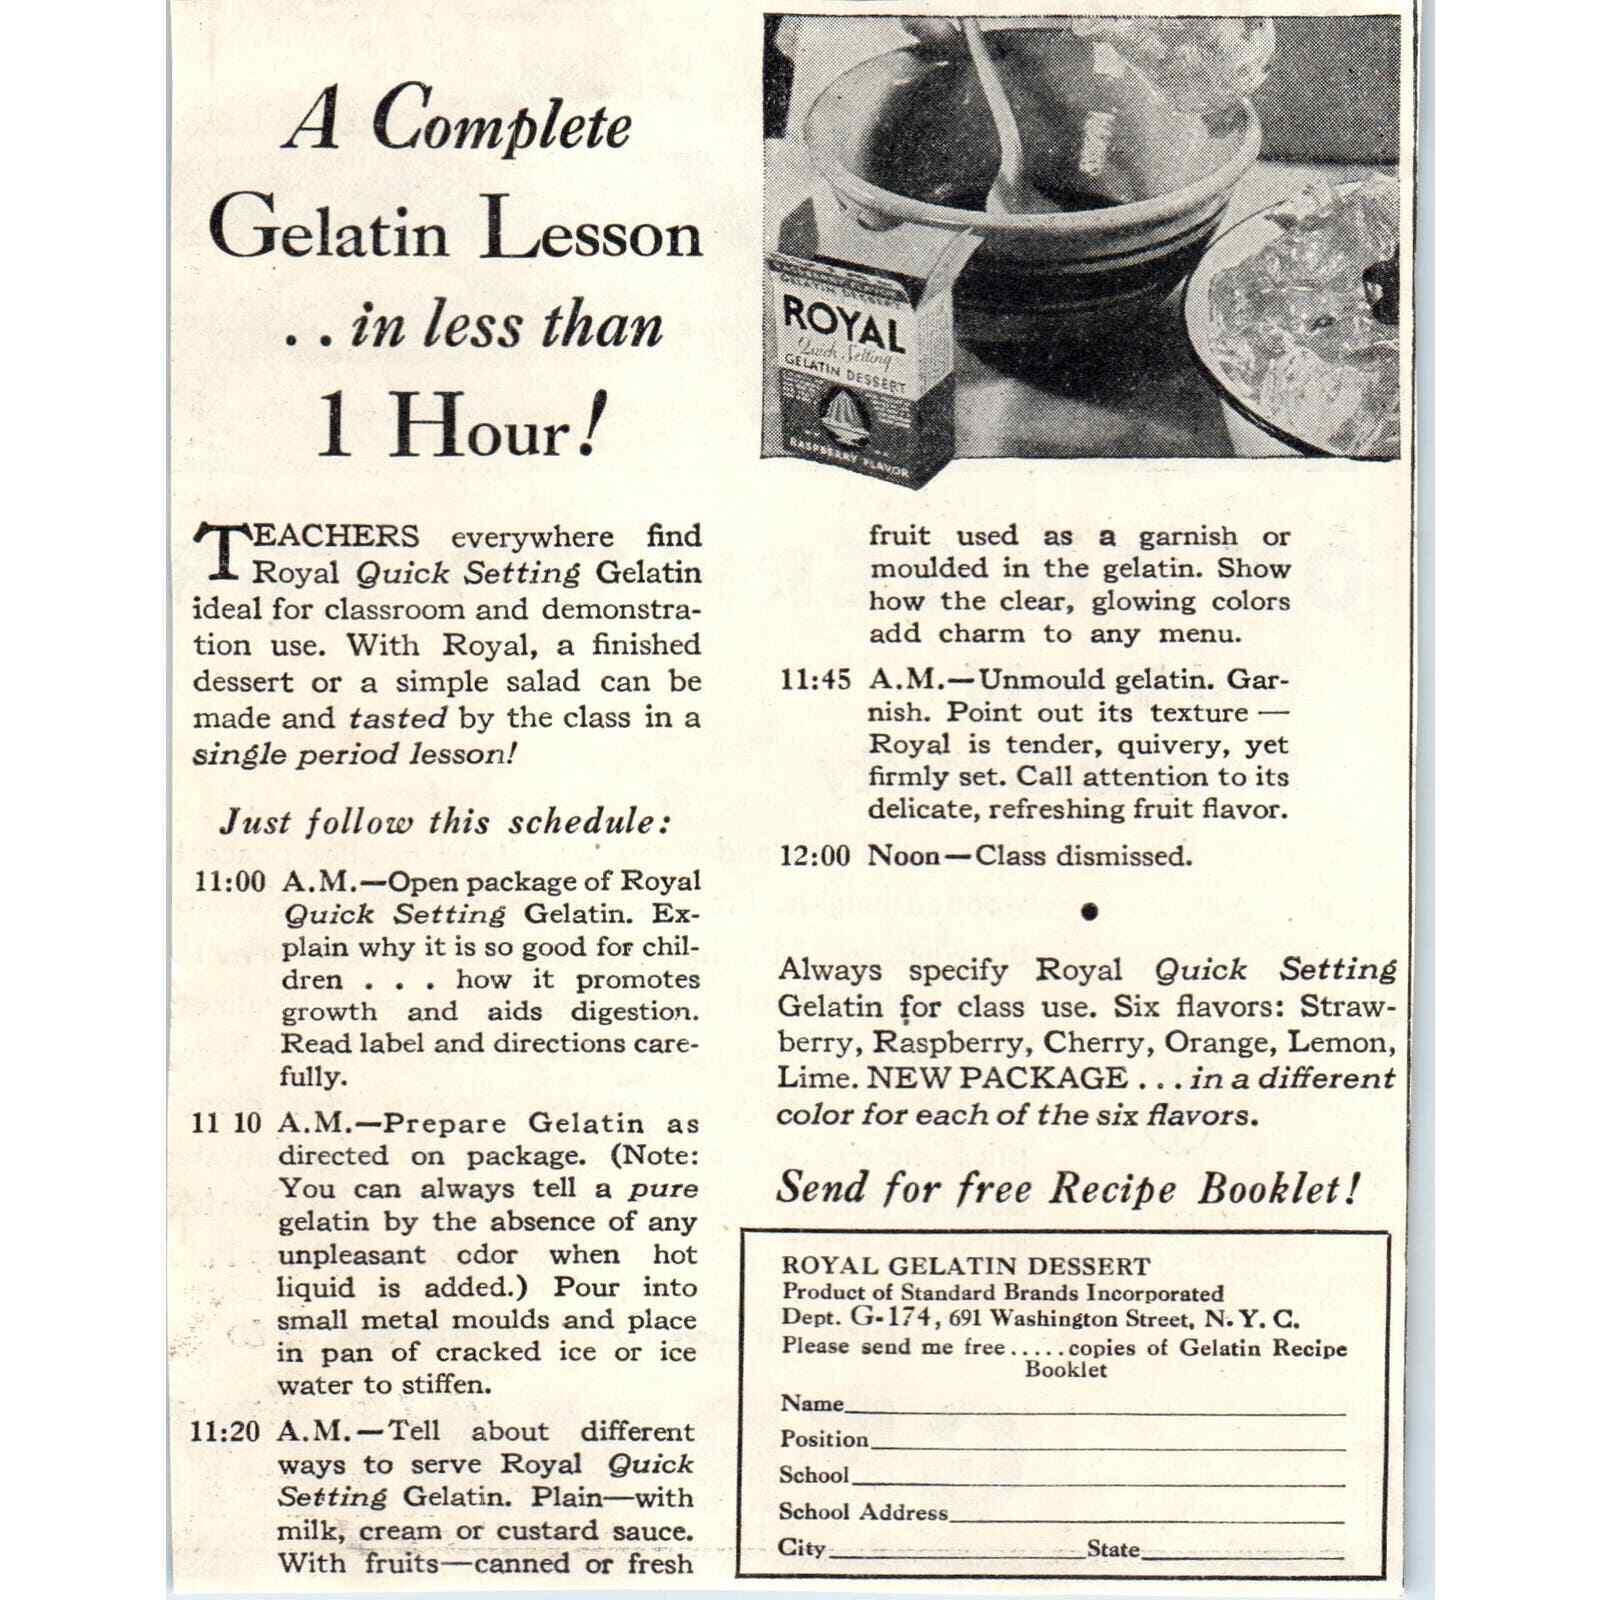 1931 Royal Gelatin Lesson Complete in Less Than One Hour Advertisement 5x6 FL5-1